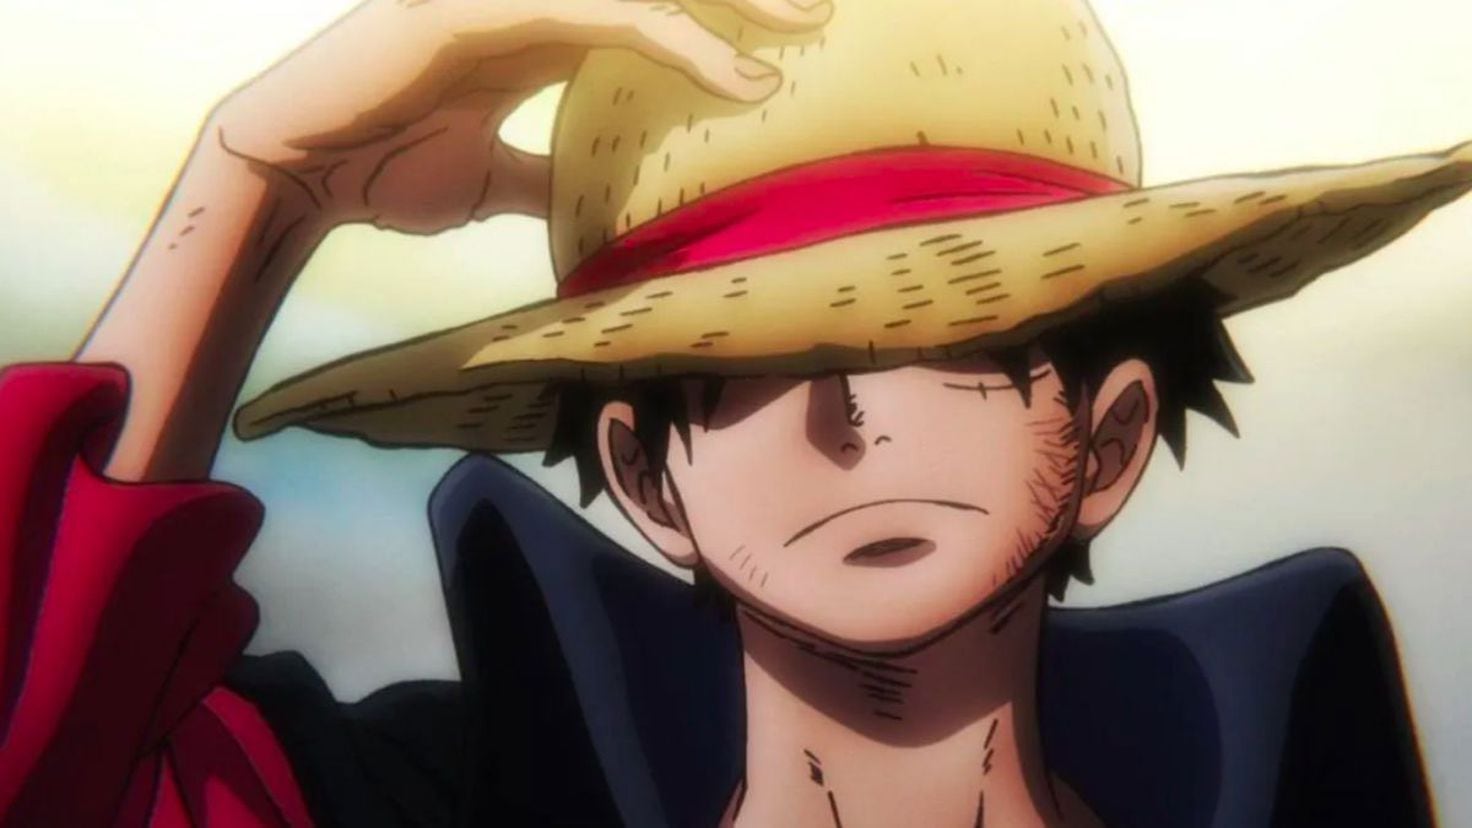 New Seasons of 'One Piece' Anime Coming to Netflix in March 2022